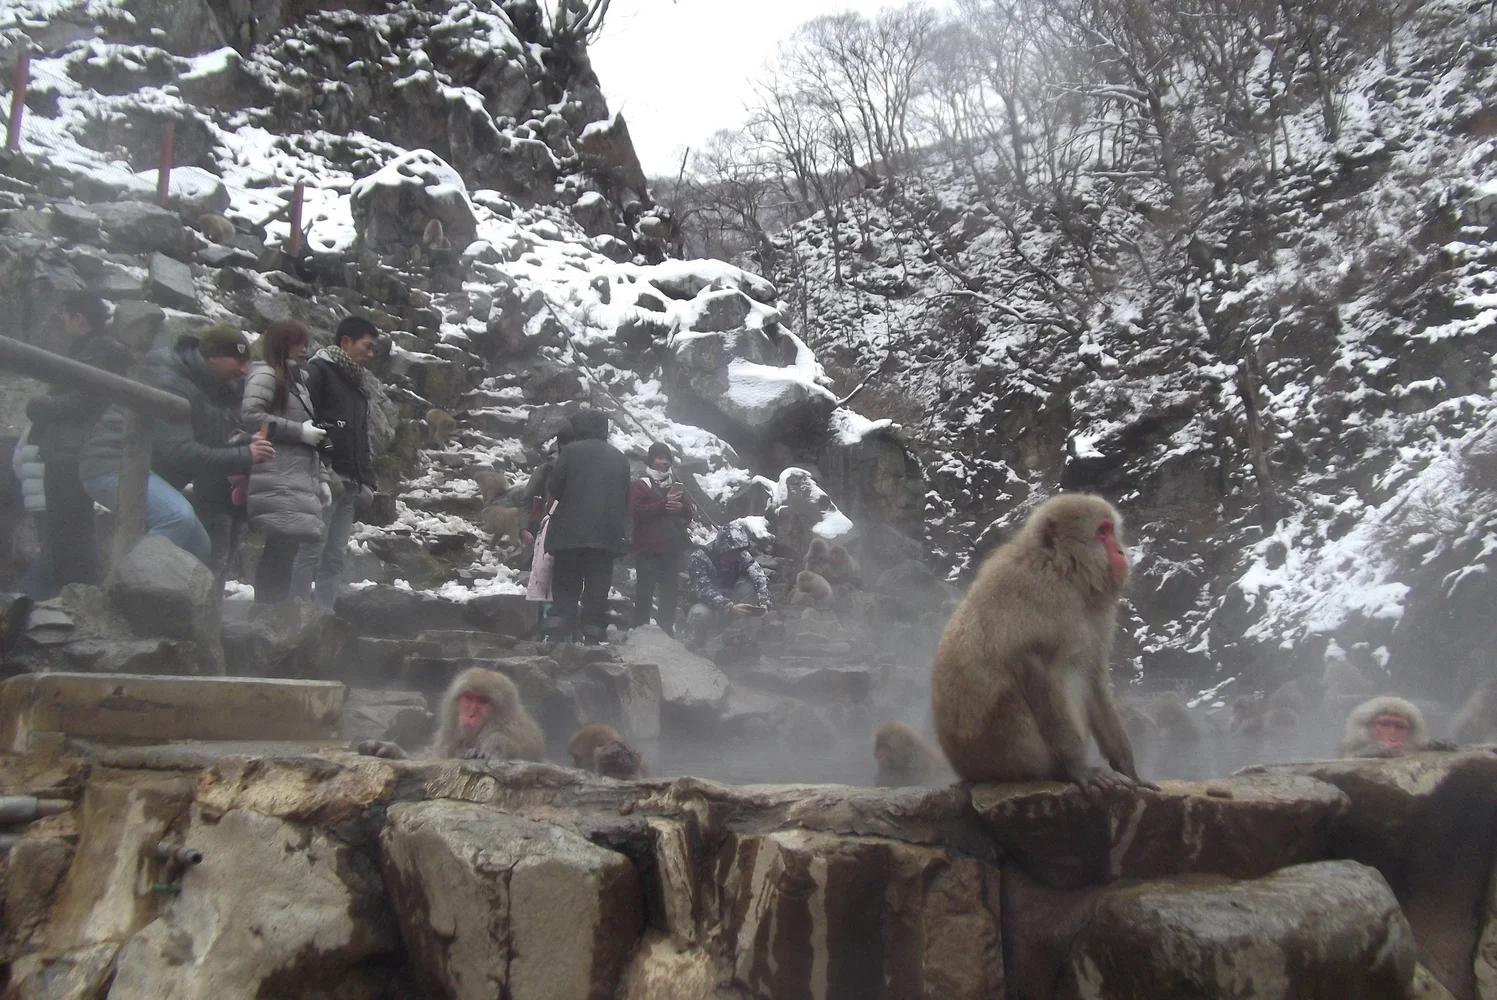 Go on a one day trip to see the Snow Monkeys!